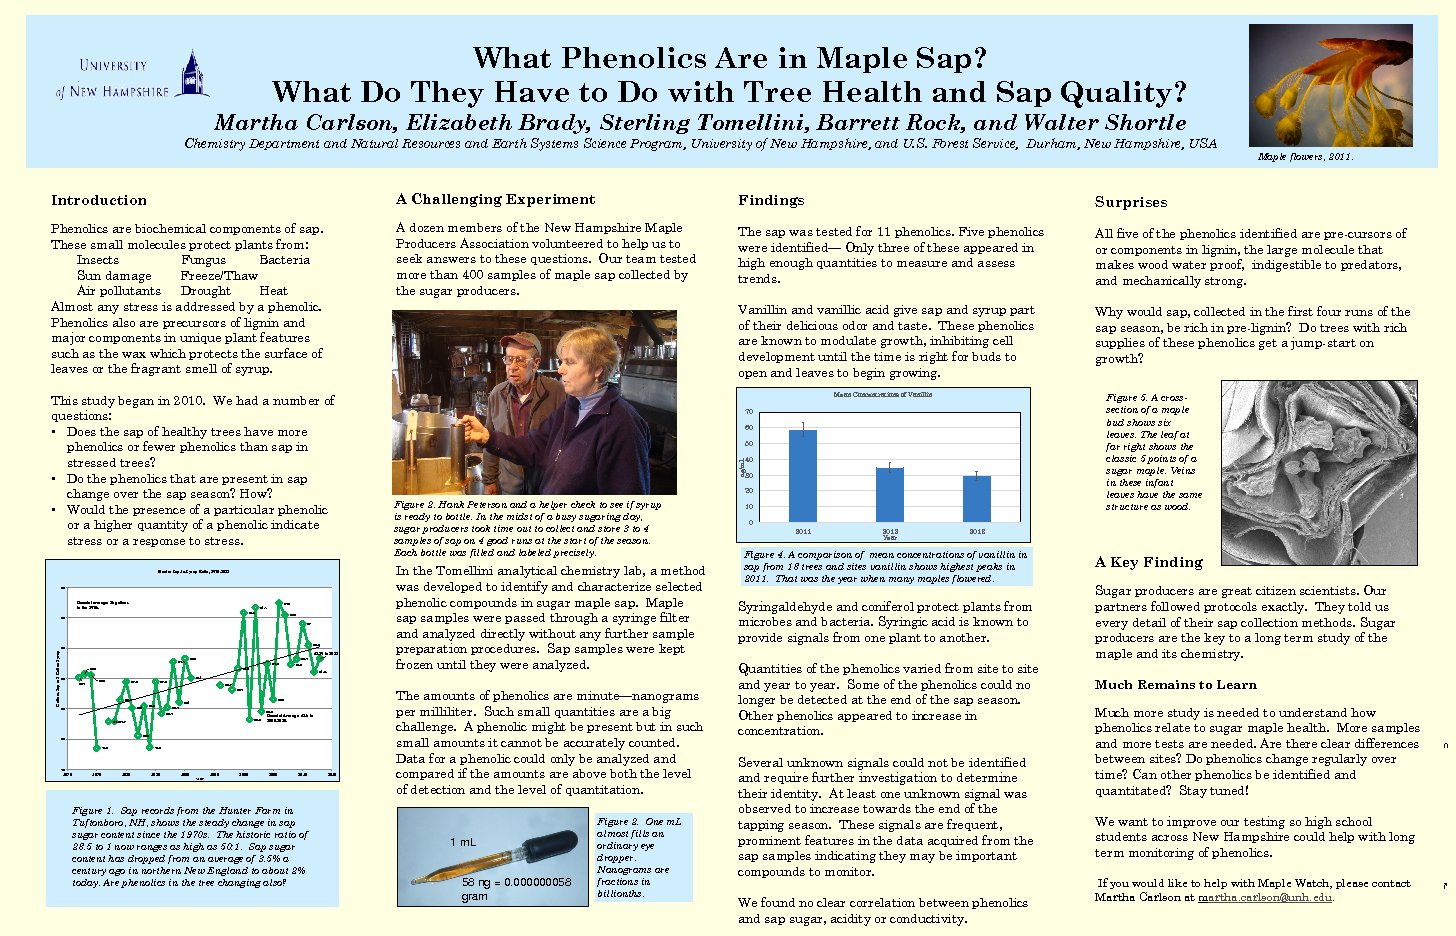 What Phenolics Are In Maple Sap? by mrg39